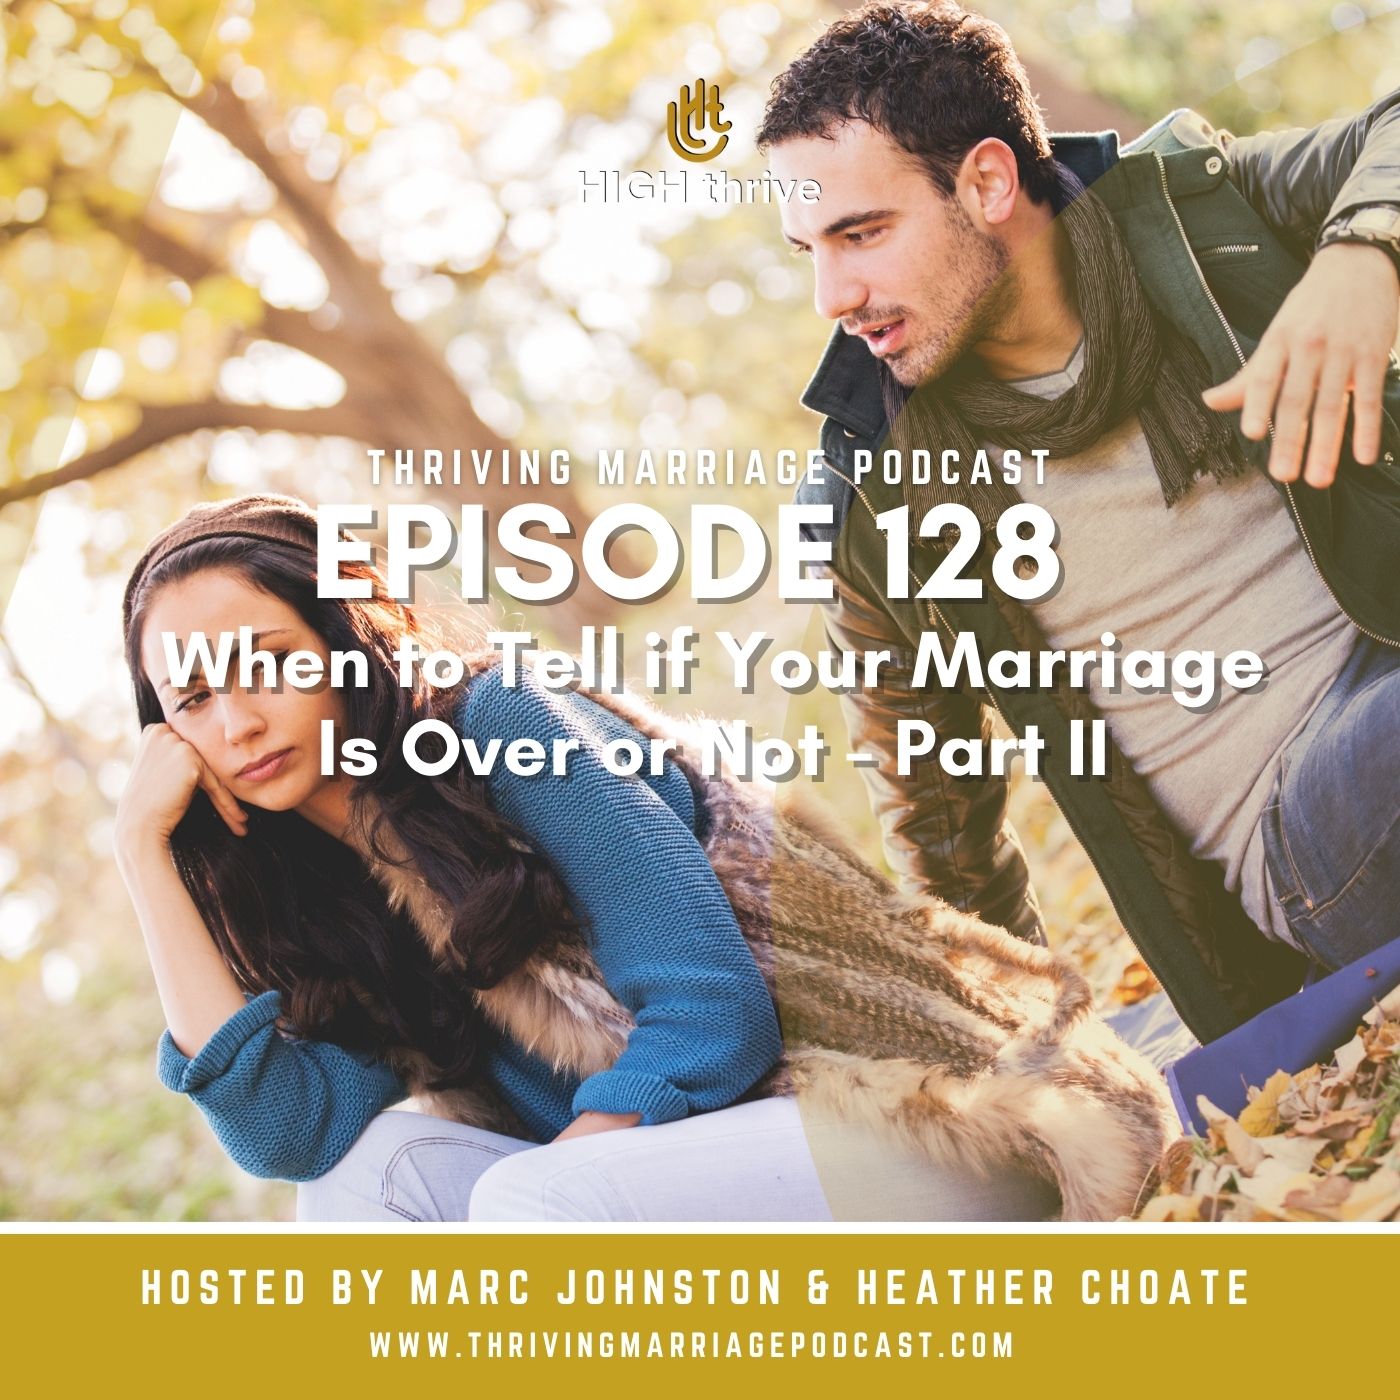 Episode 128: When to Tell if Your Marriage Is Over or Not - Part II